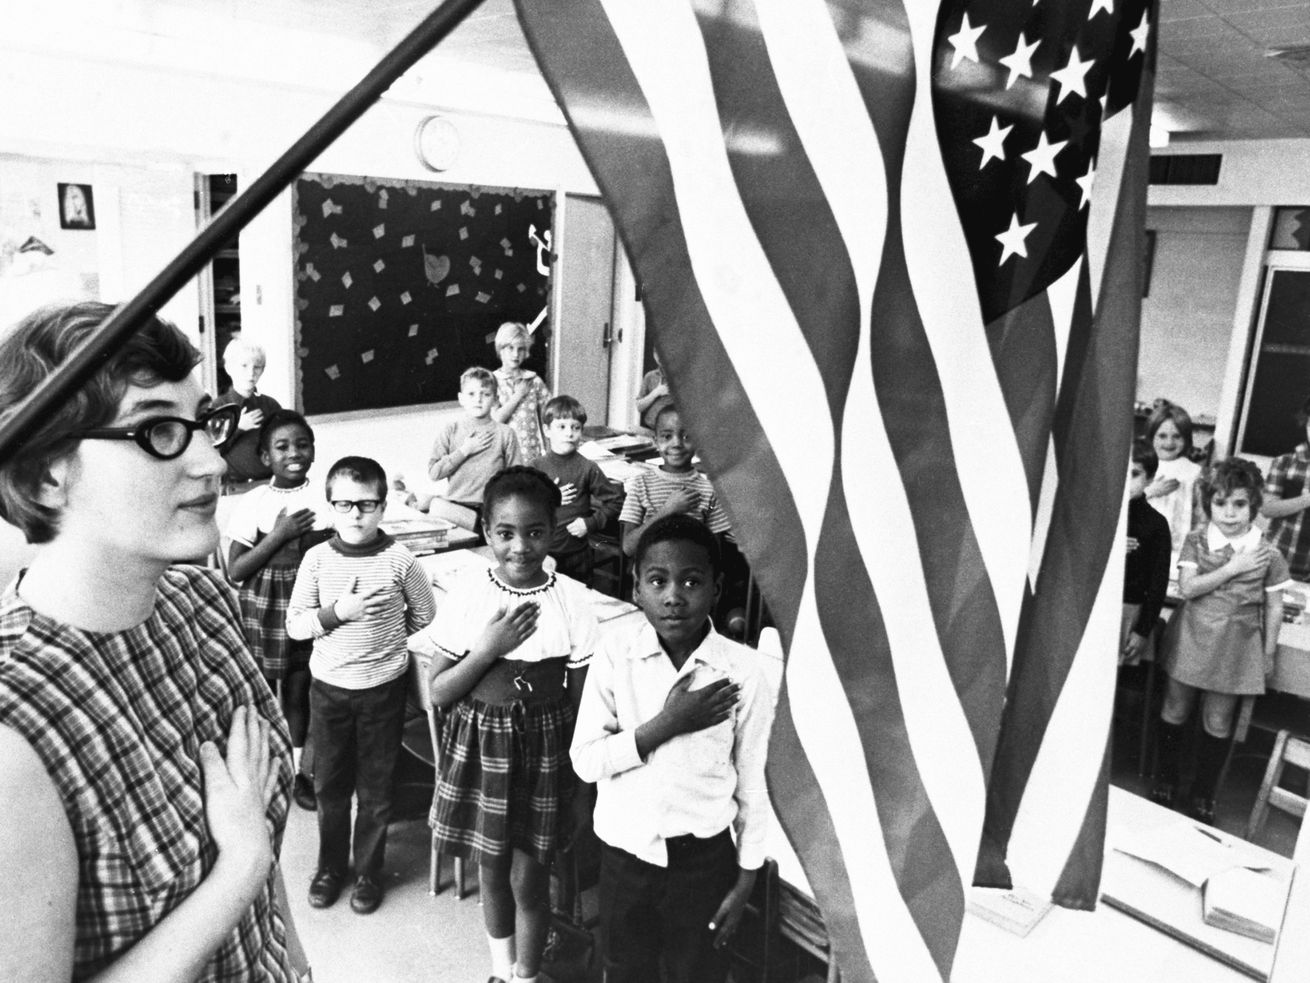 Is there an uncontroversial way to teach America’s racist history?